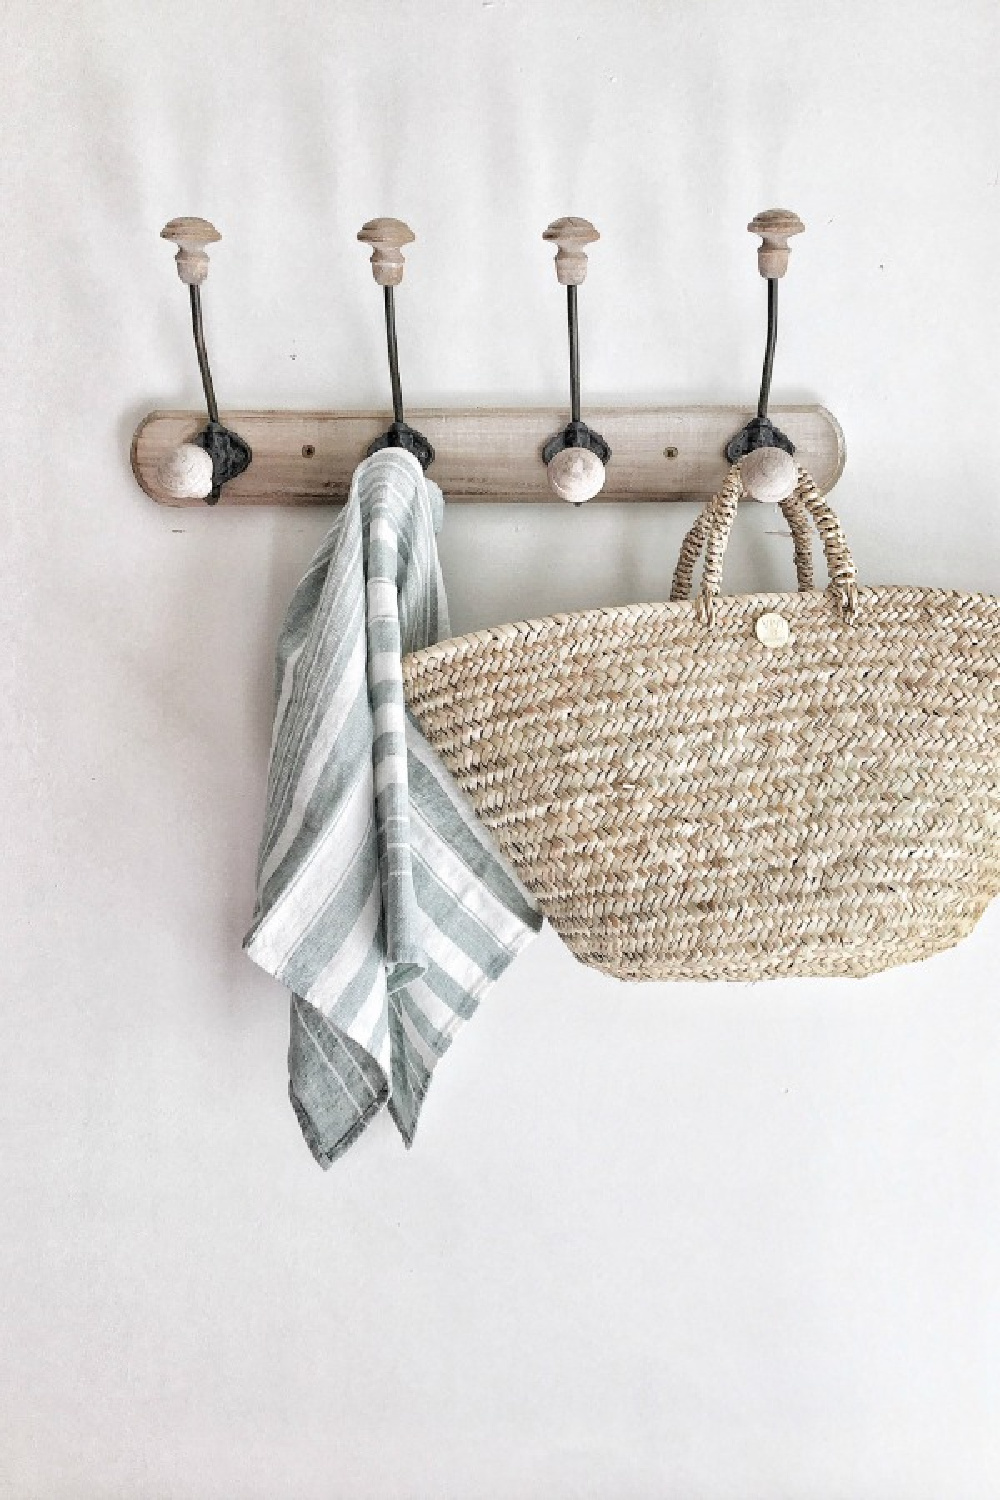 French country hanging hook rack with stripe dishtowel and woven market basket.